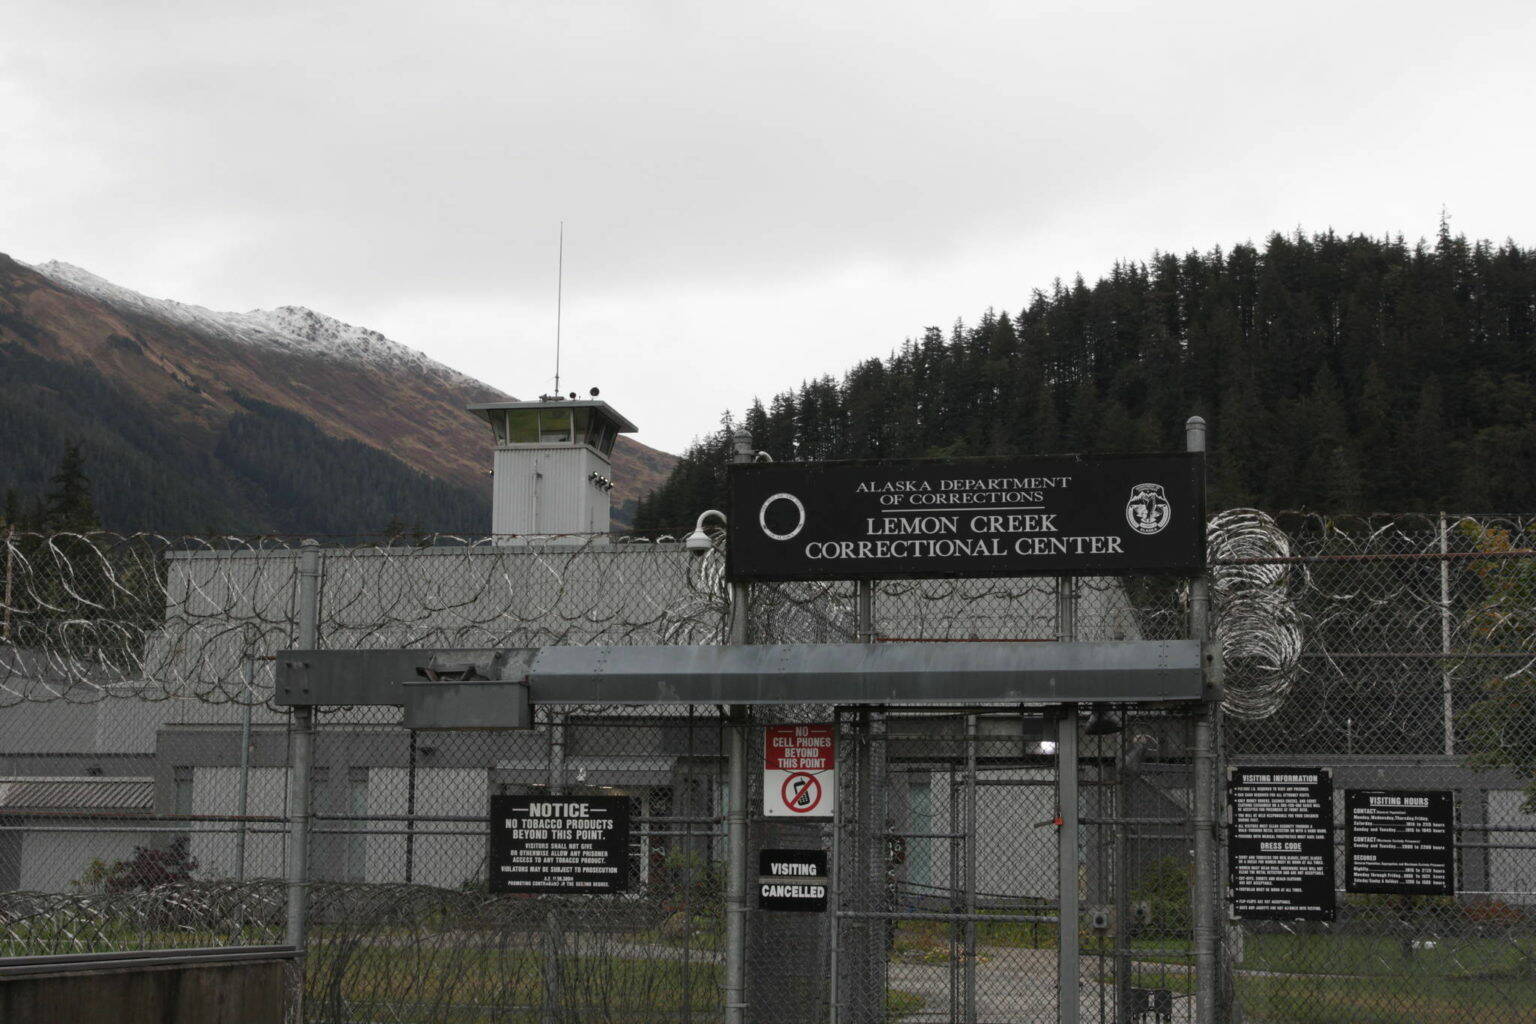 Michael S. Lockett / Juneau Empire File 
A number of complaints about issues at Lemon Creek Correctional Center as it dealt with COVID issues in 2020 were addressed in a recent news release from the state ombudsman’s office.